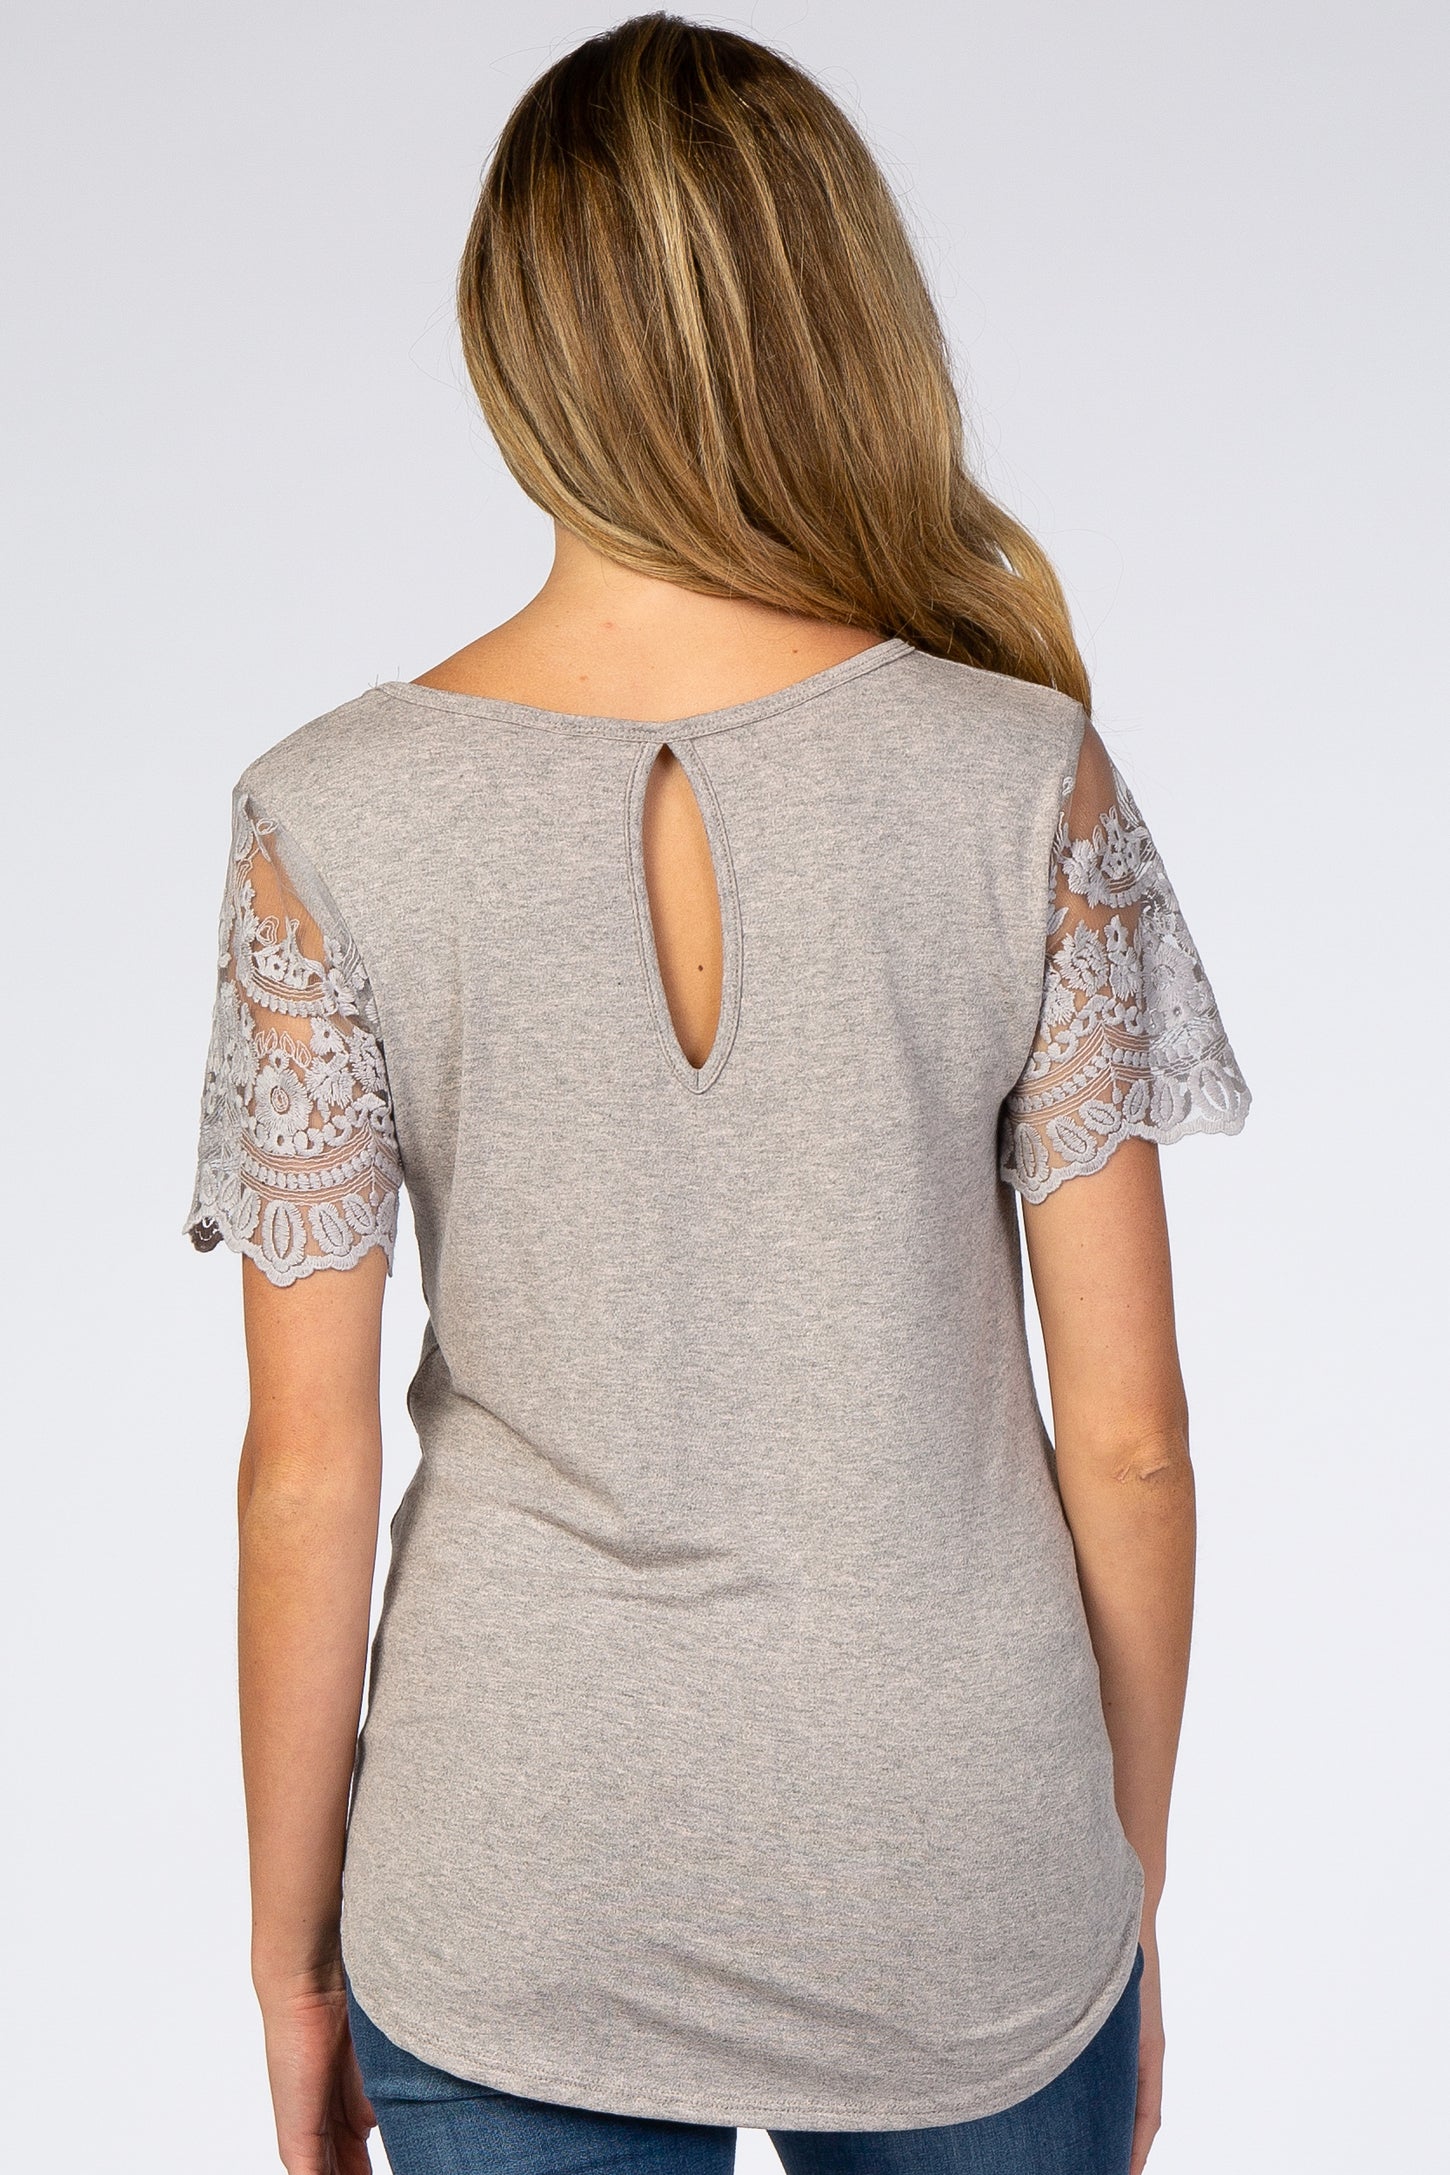 Heather Grey Lace Sleeve Maternity Top